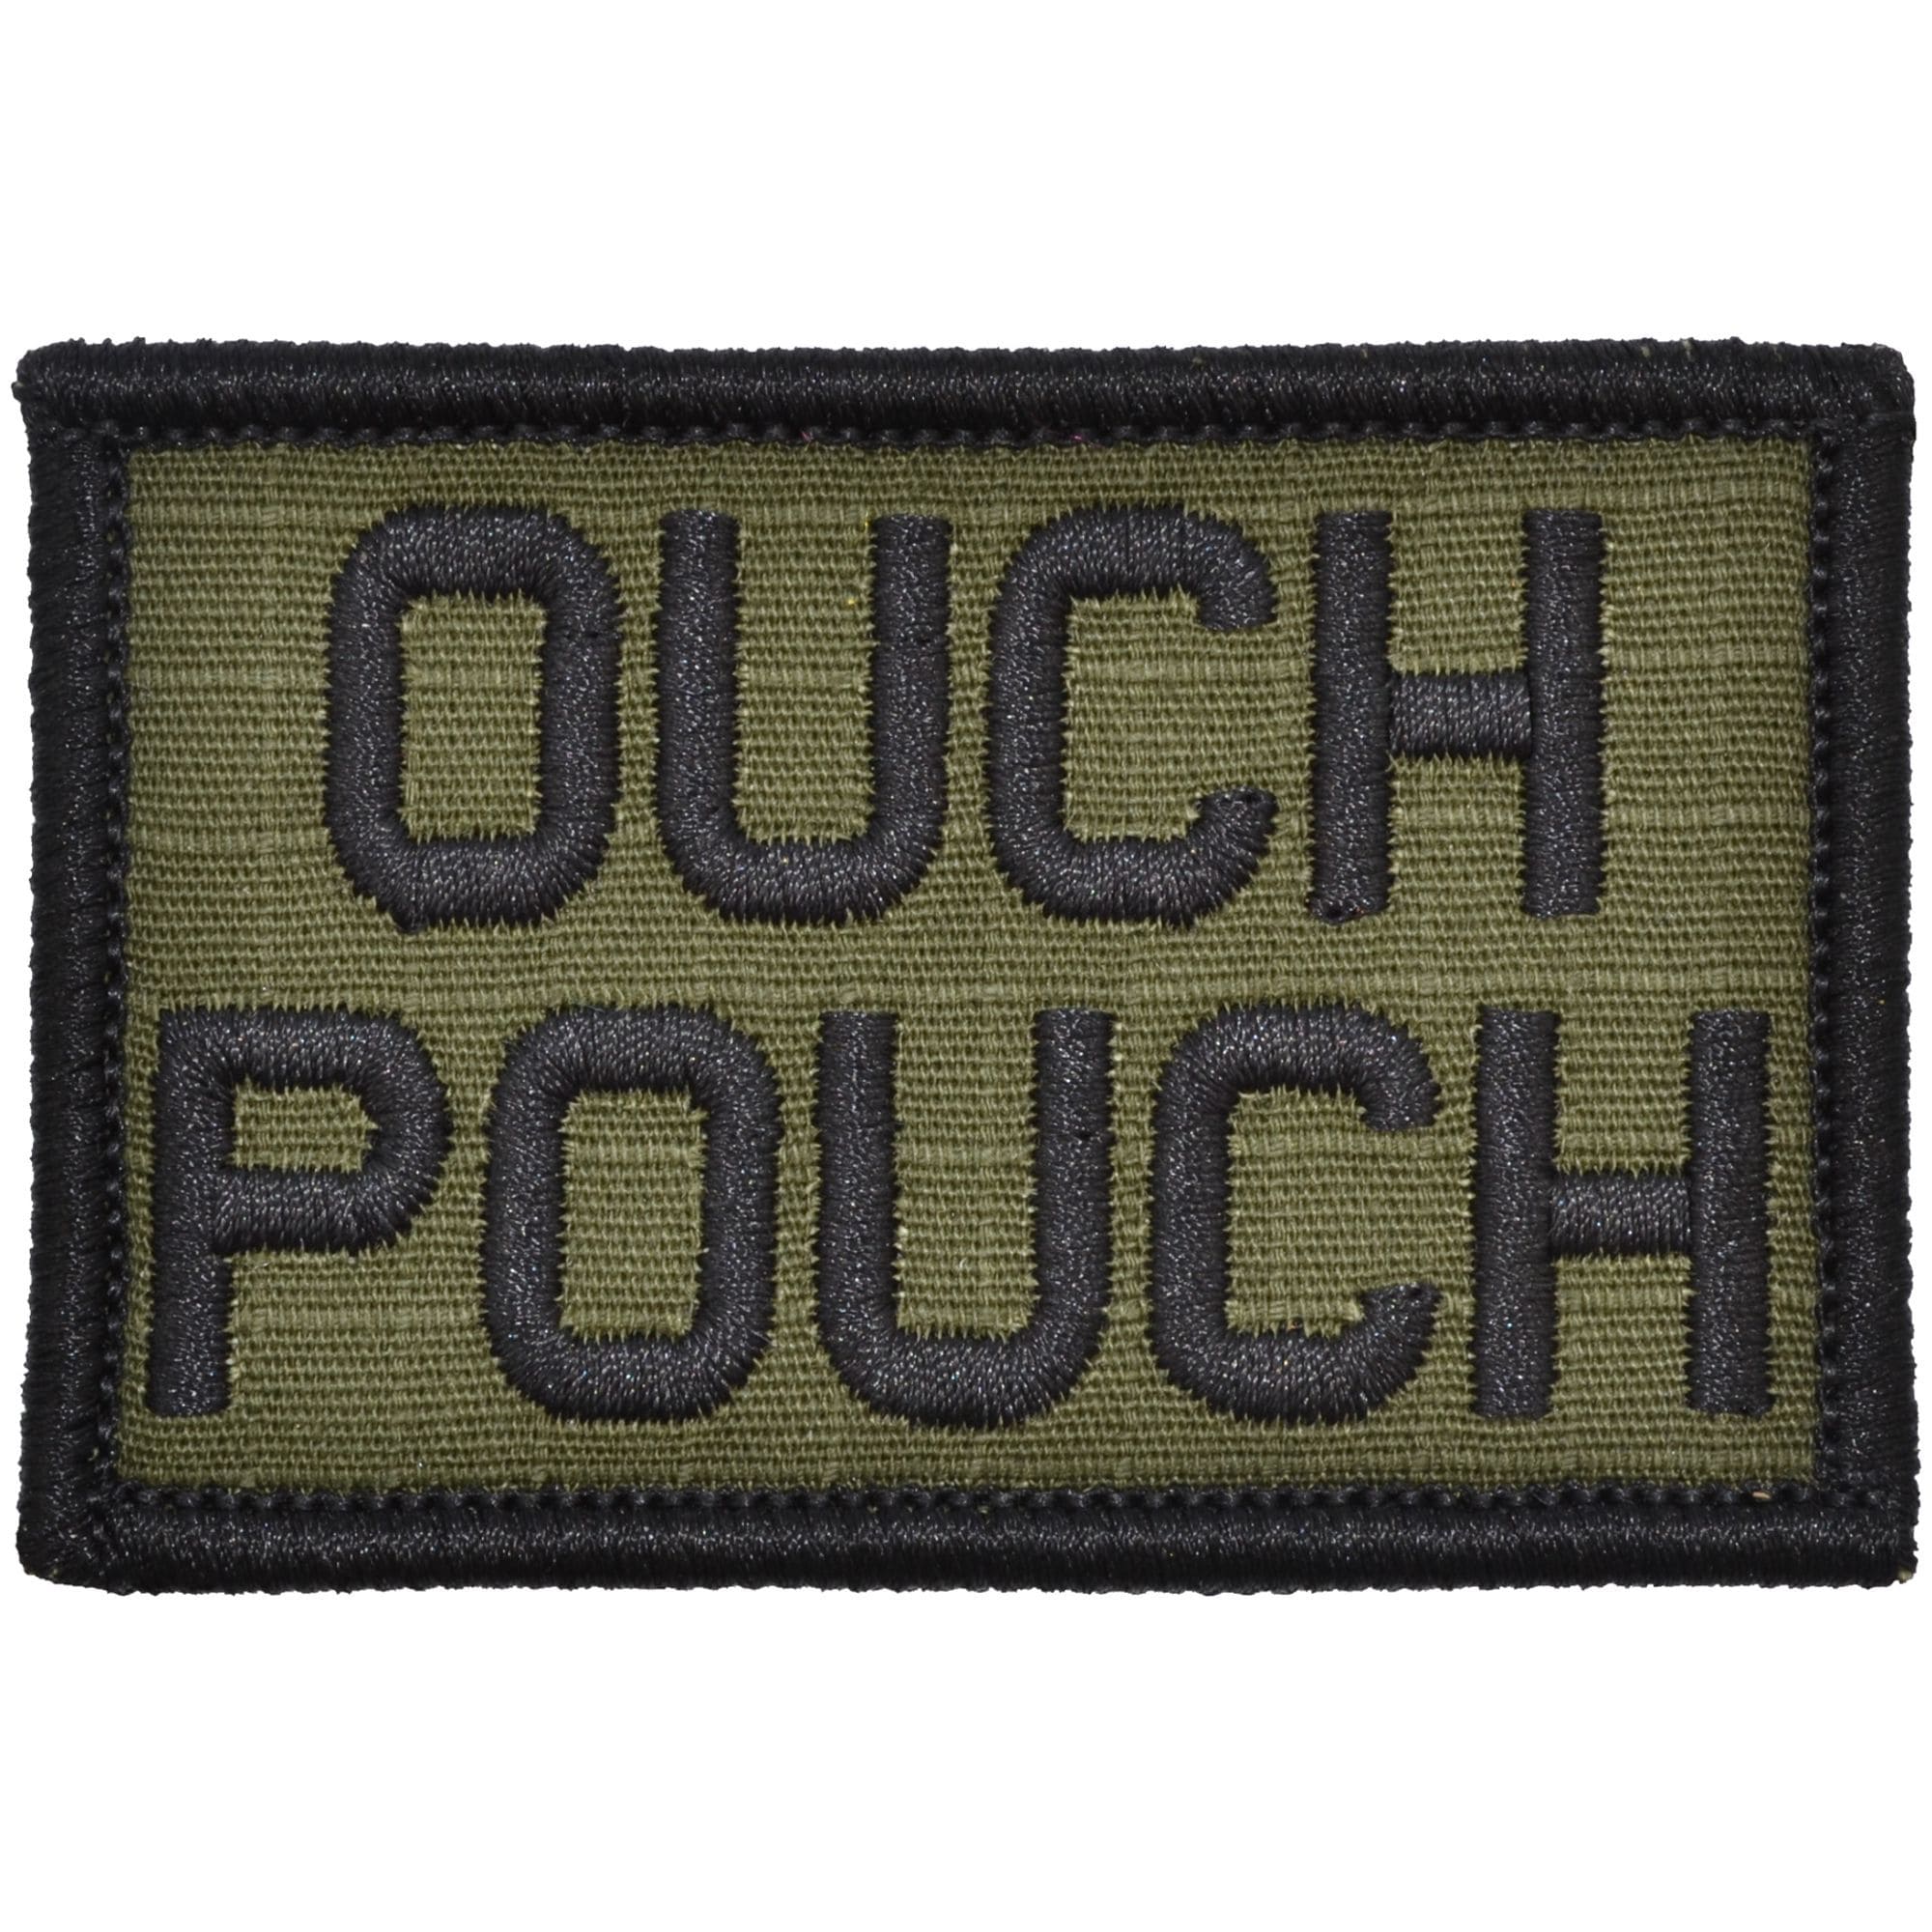  Conan What is Best in Life Morale Patch.2x3 Hook and Loop  Patch. Made in The USA : Clothing, Shoes & Jewelry